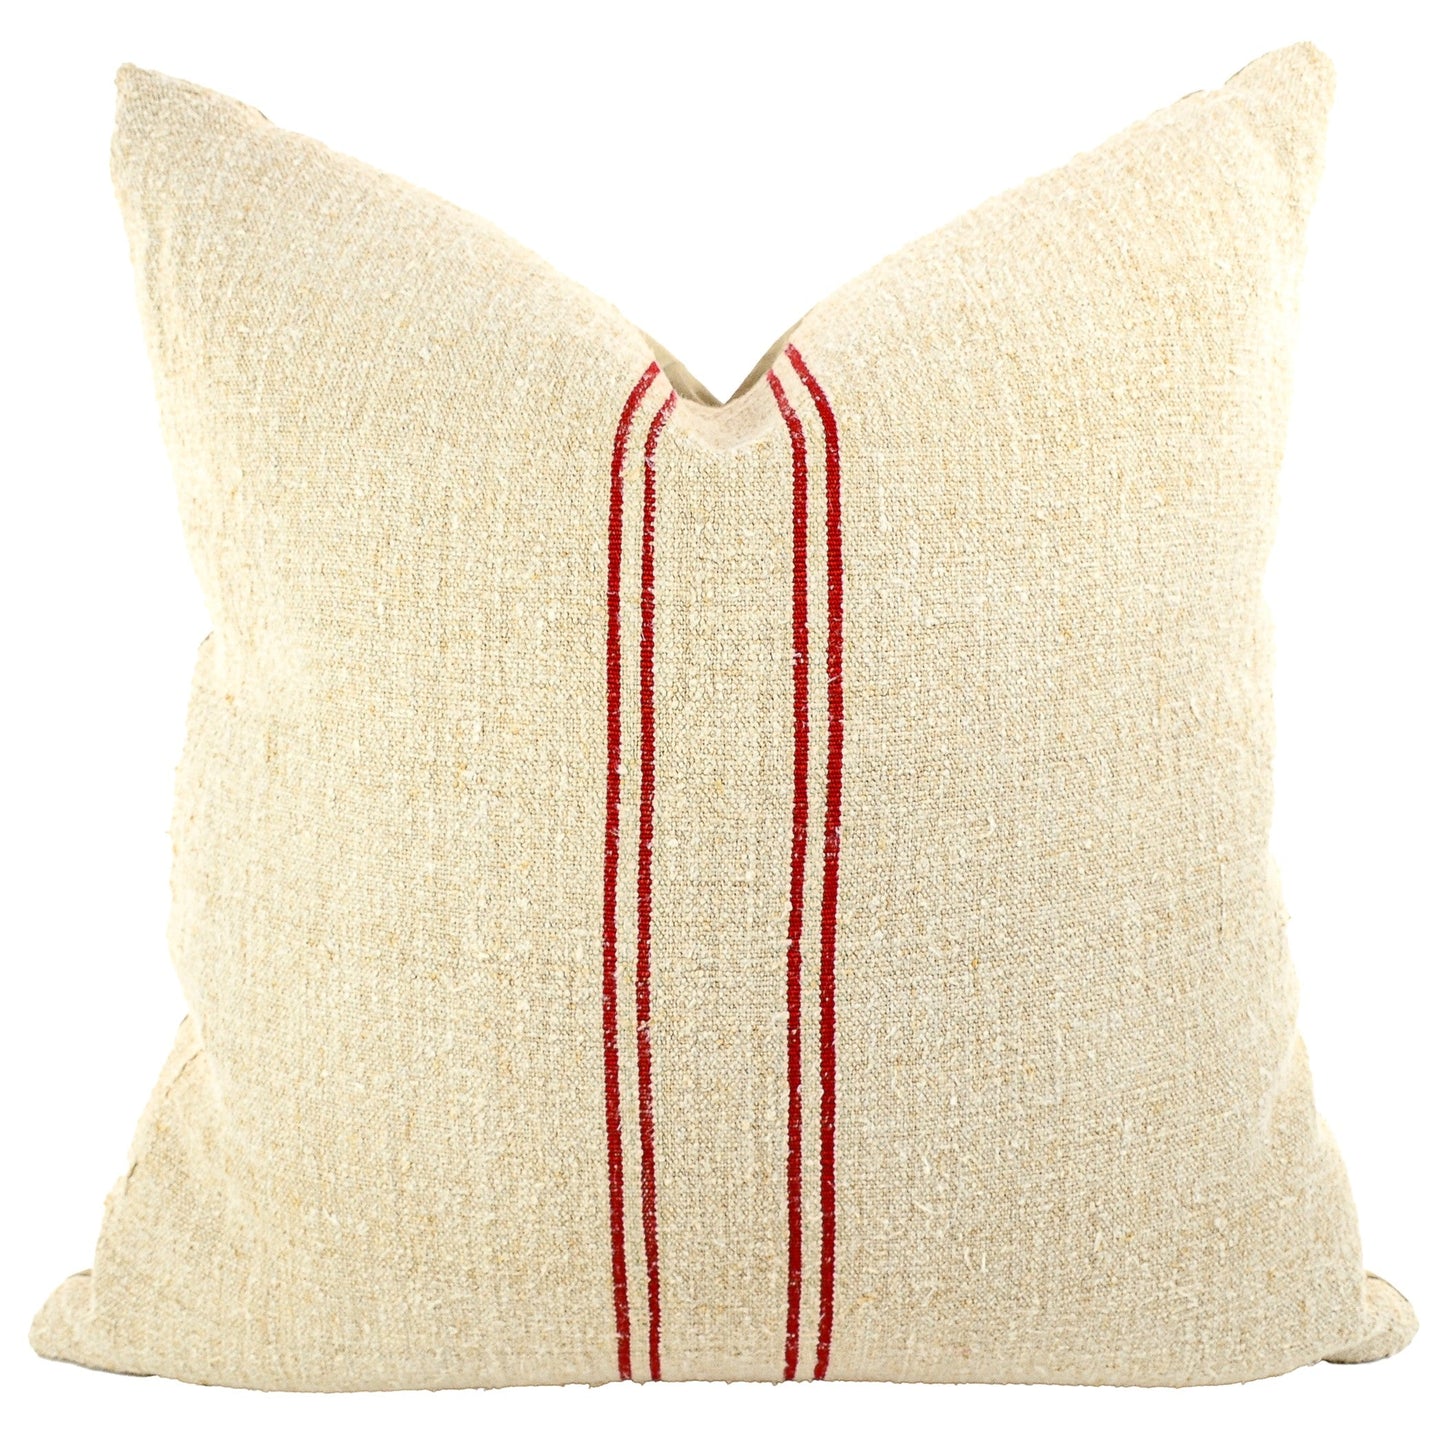 Front of pillow made from antique European grain sack natural tone linen with red vertical stripes in the middle of the pillow